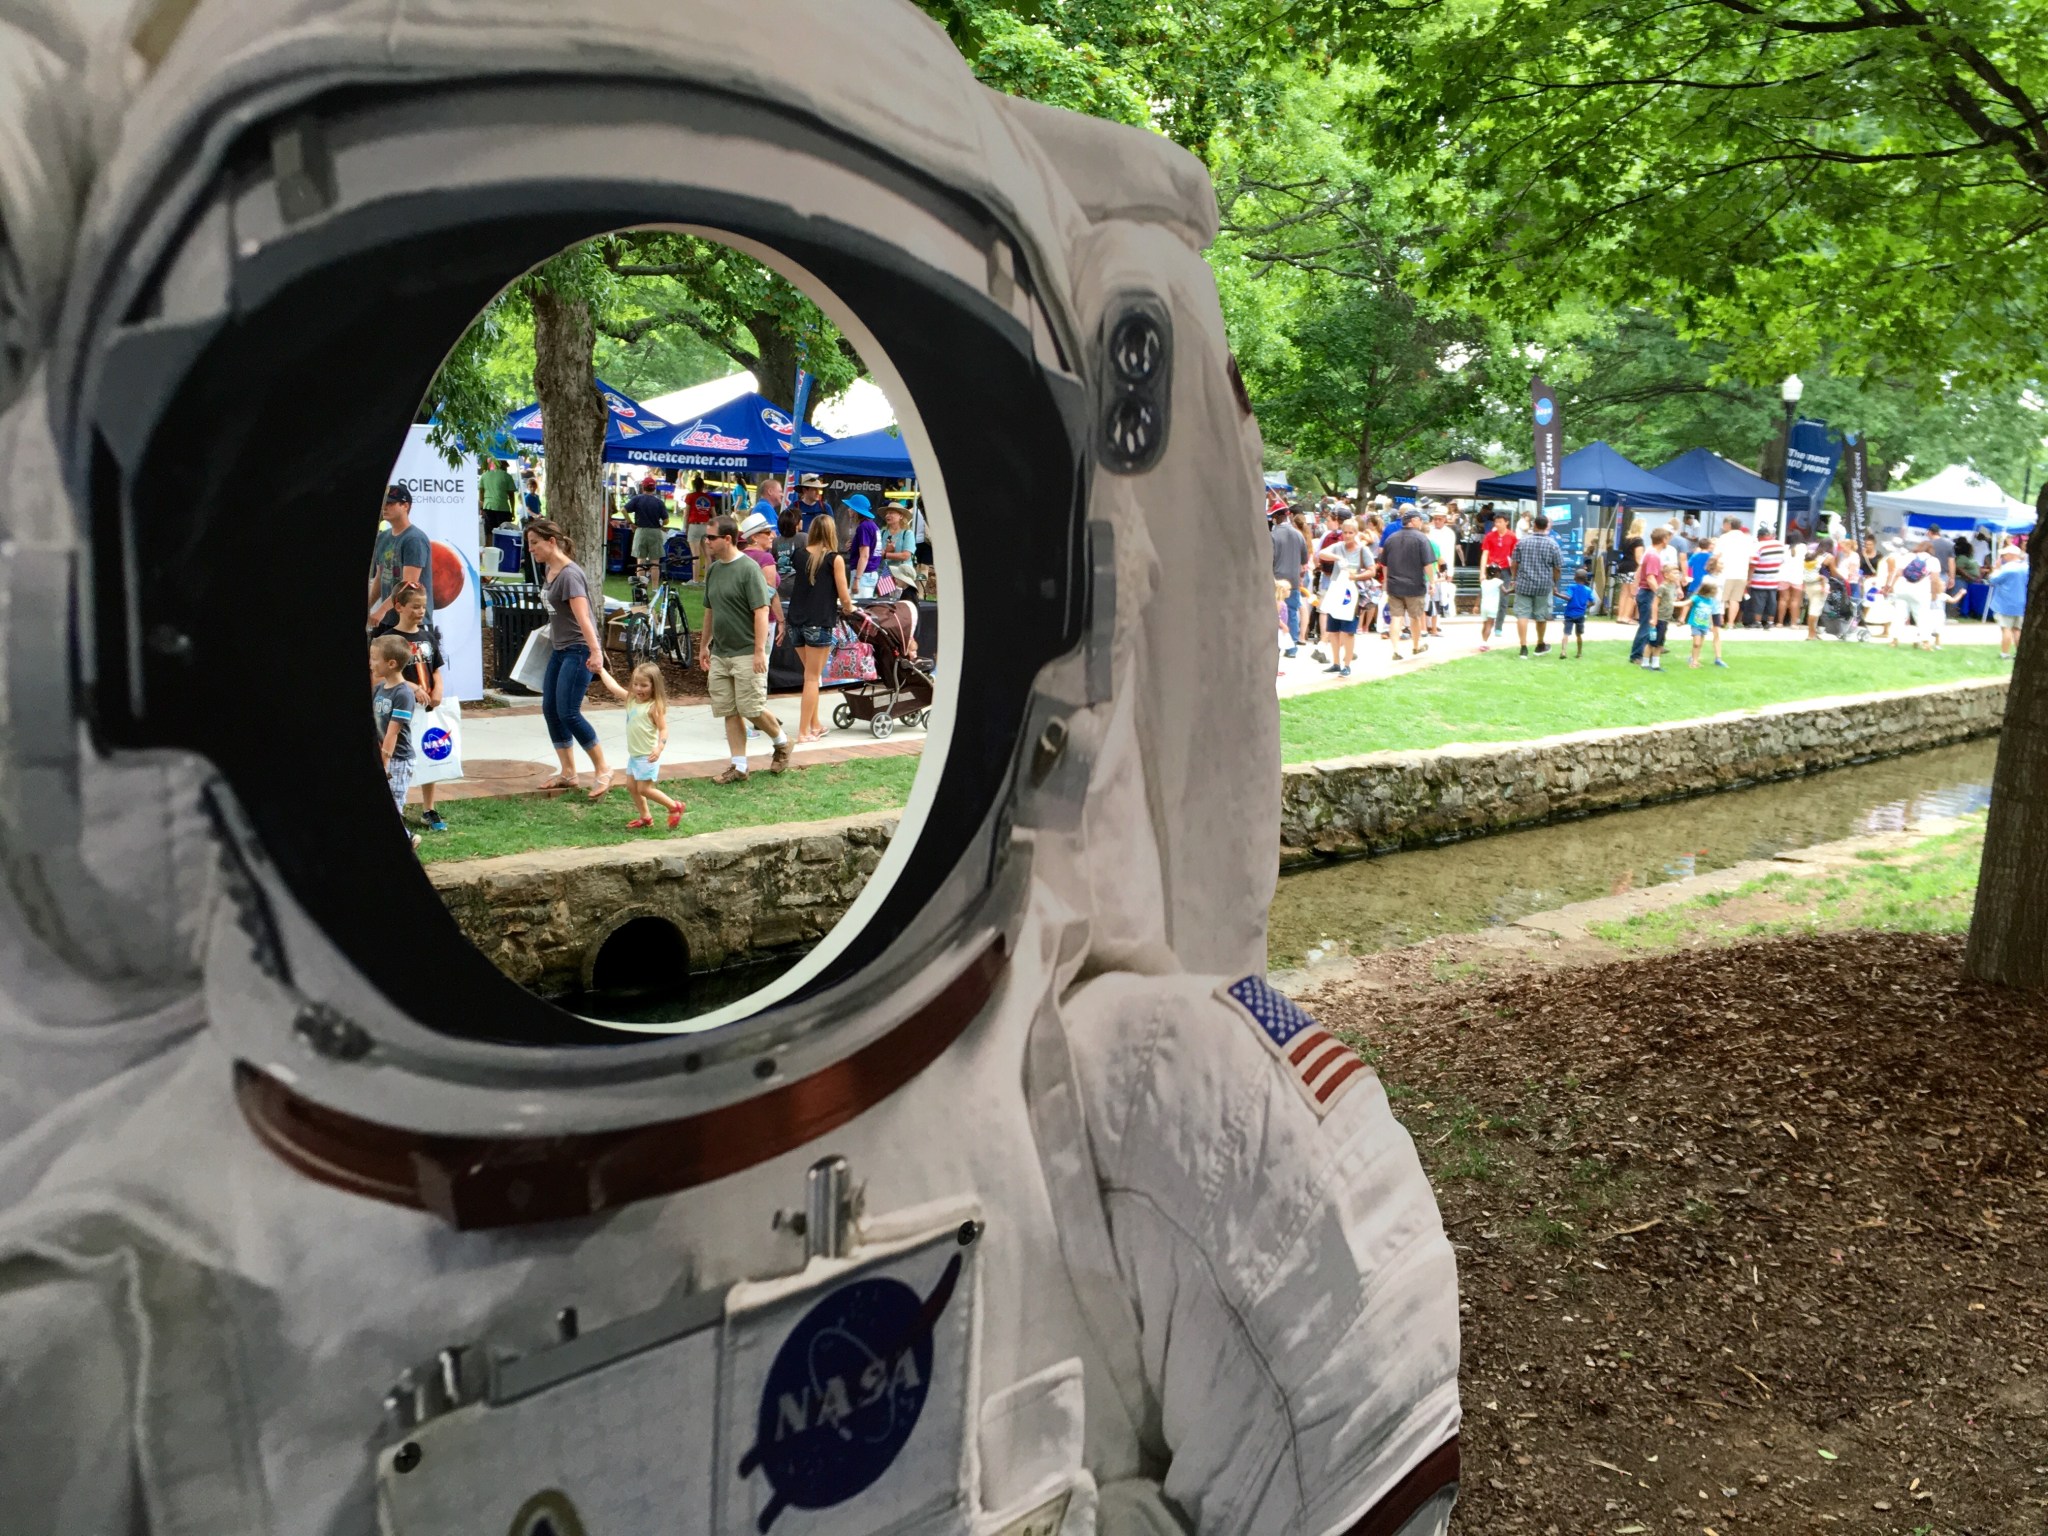 Marshall and Downtown Huntsville Inc. will host NASA in the Park Saturday, June 17, from 10 a.m. to 3 p.m.